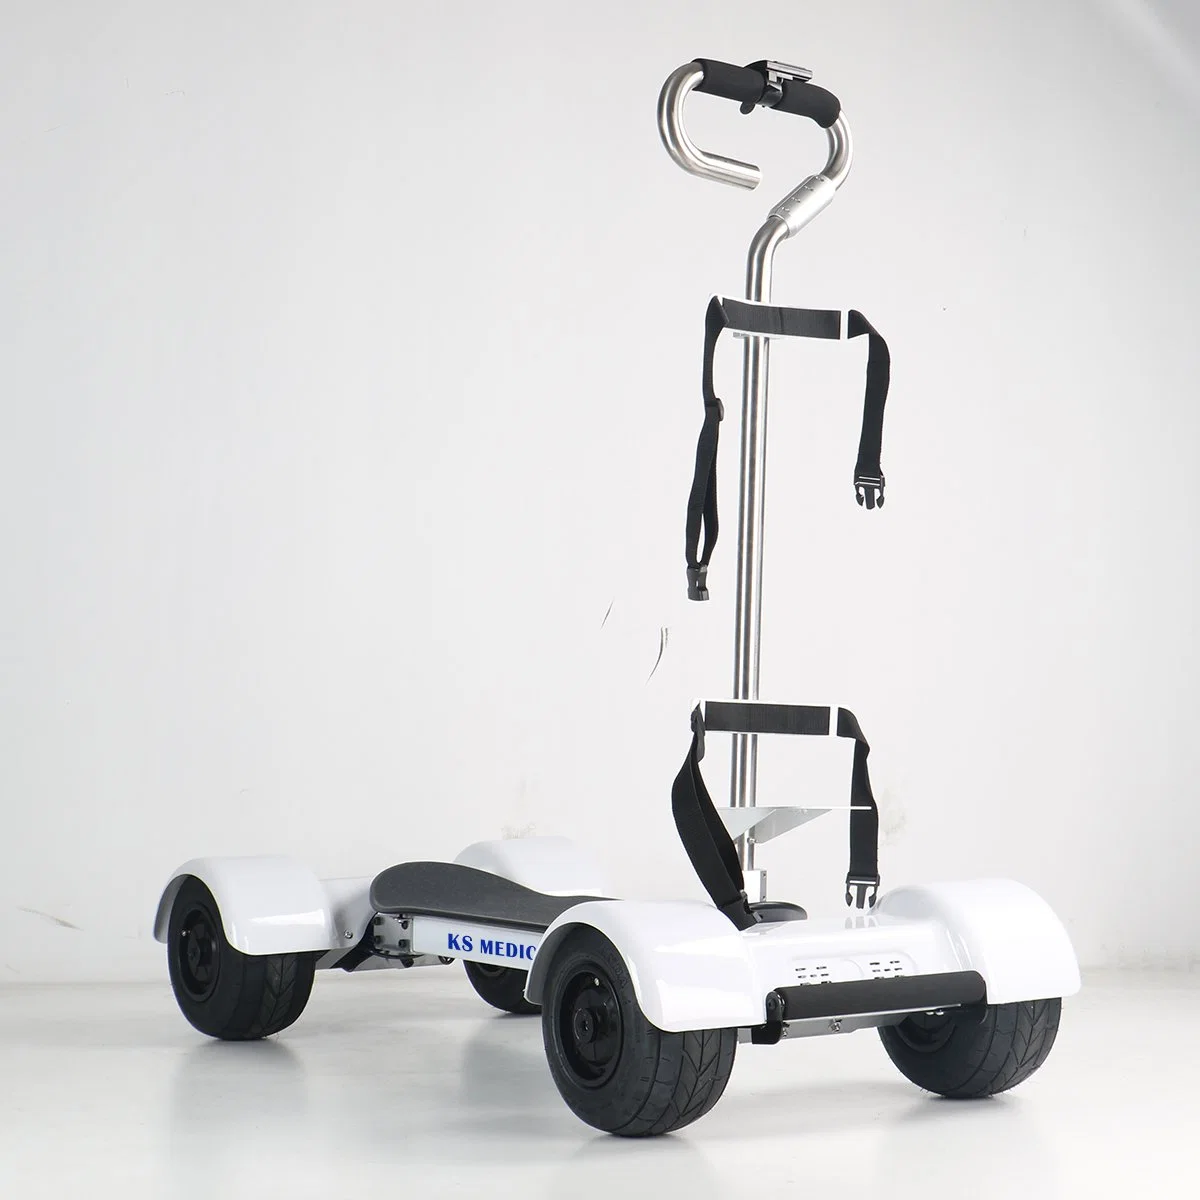 Ksm-930 Steady Four Wheels Escooter Buy Electric Golf Cart Scooter Skateboard 4 Wheels 2000W 60V for Golf Course